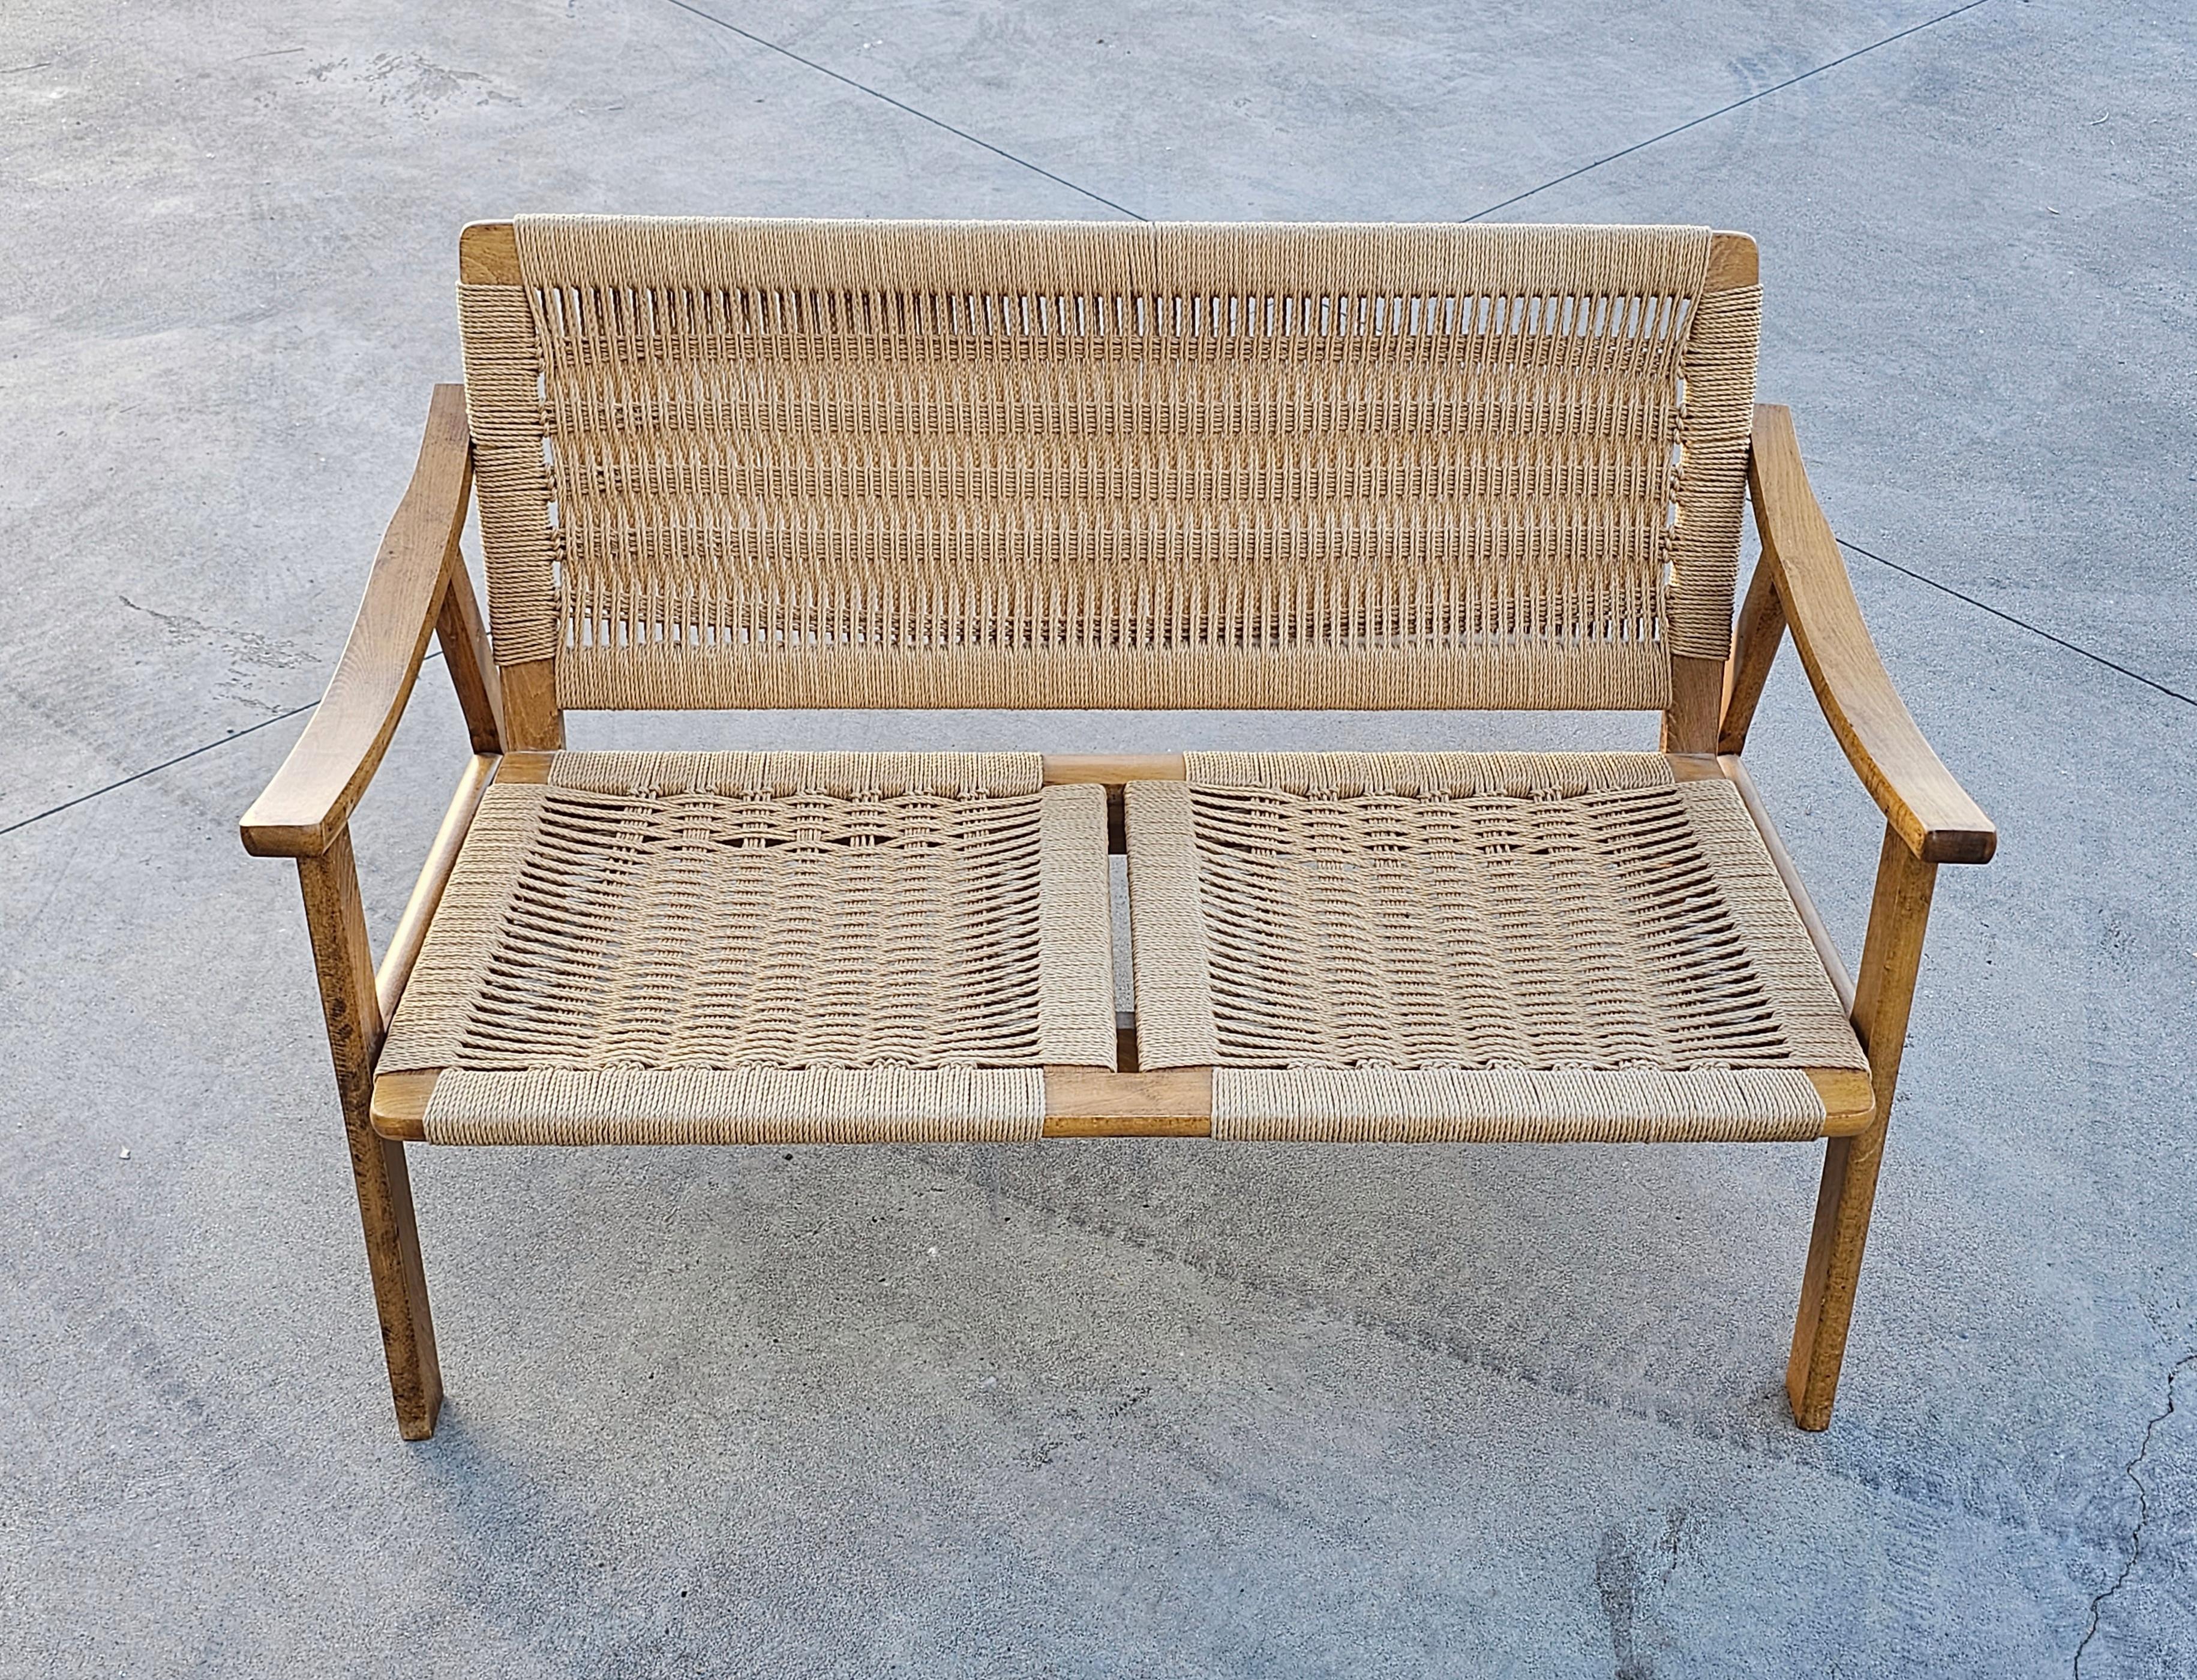 In this listing you will find a gorgeous and very rare two seater sofa or a settee done in oak with Danish paper cord hand-woven seats and backrests. The settee is done in style of Hans J. Wegner and it was manufactured in Yugoslavia in 1960s.

Very